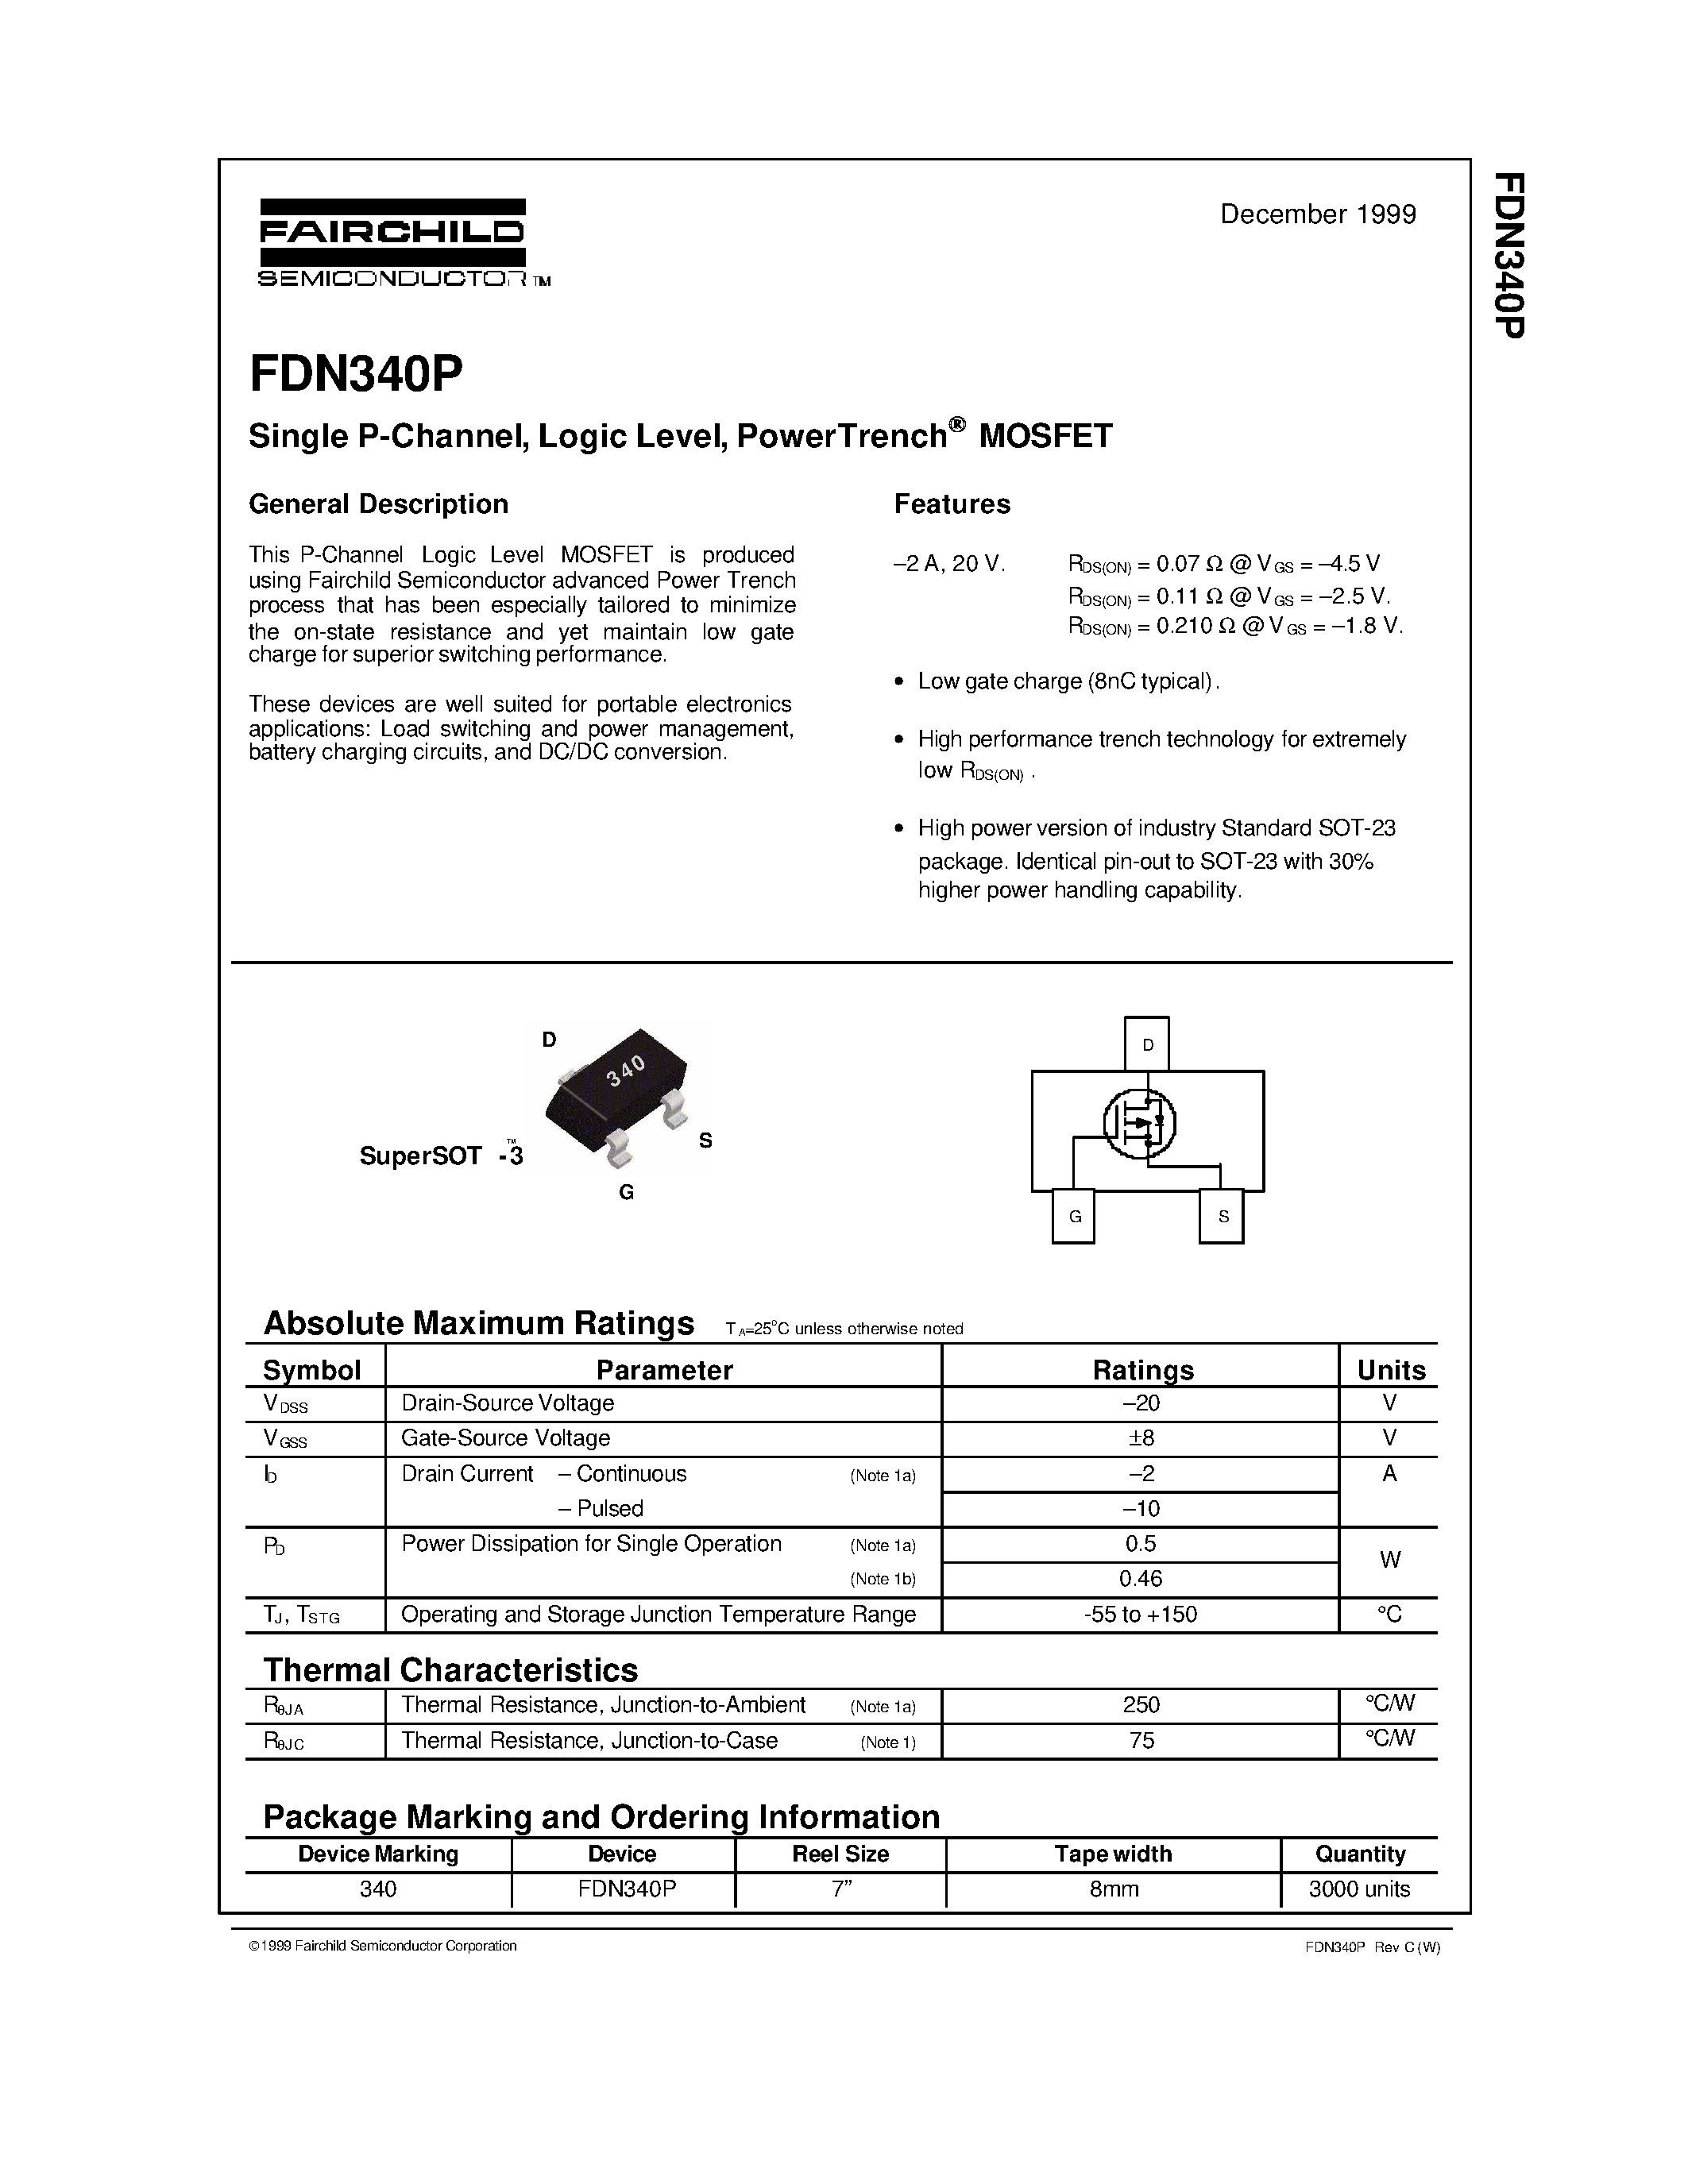 Даташит FDN340P-Single P-Channel/ Logic Level/ PowerTrench MOSFET страница 1